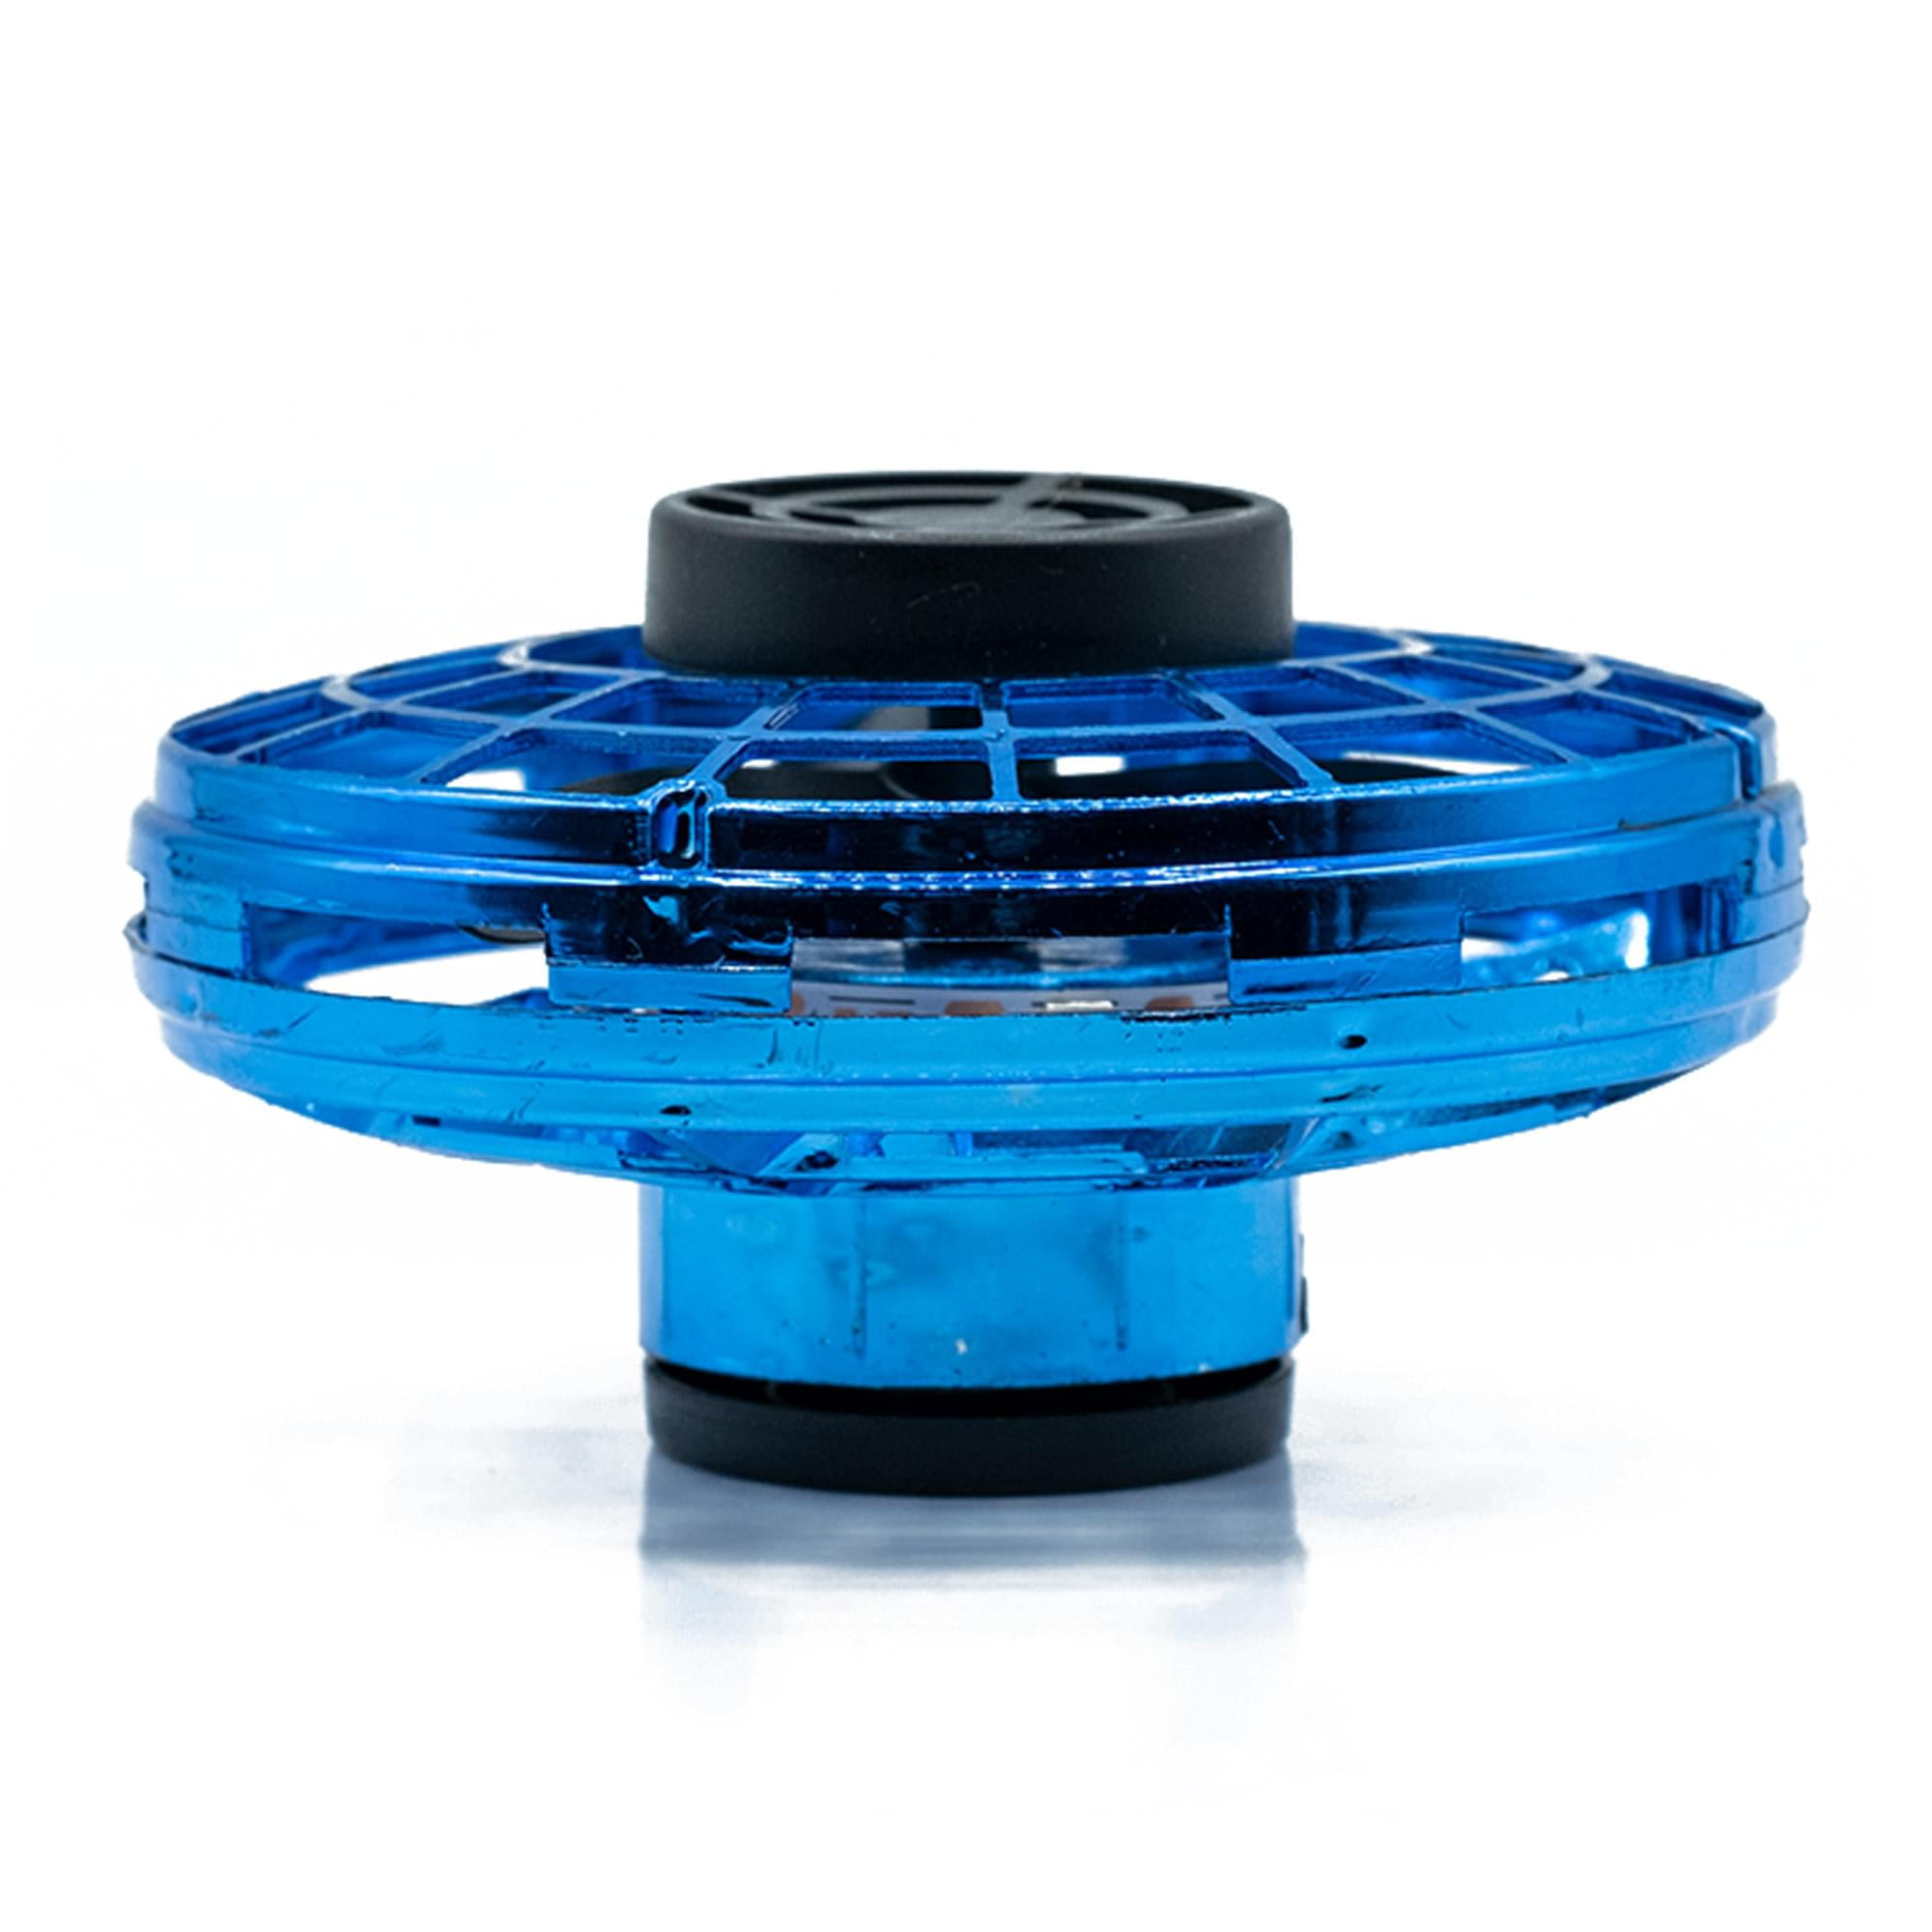 Little Hood Flynova Spinne The Most Tricked-Out Flying Spinner